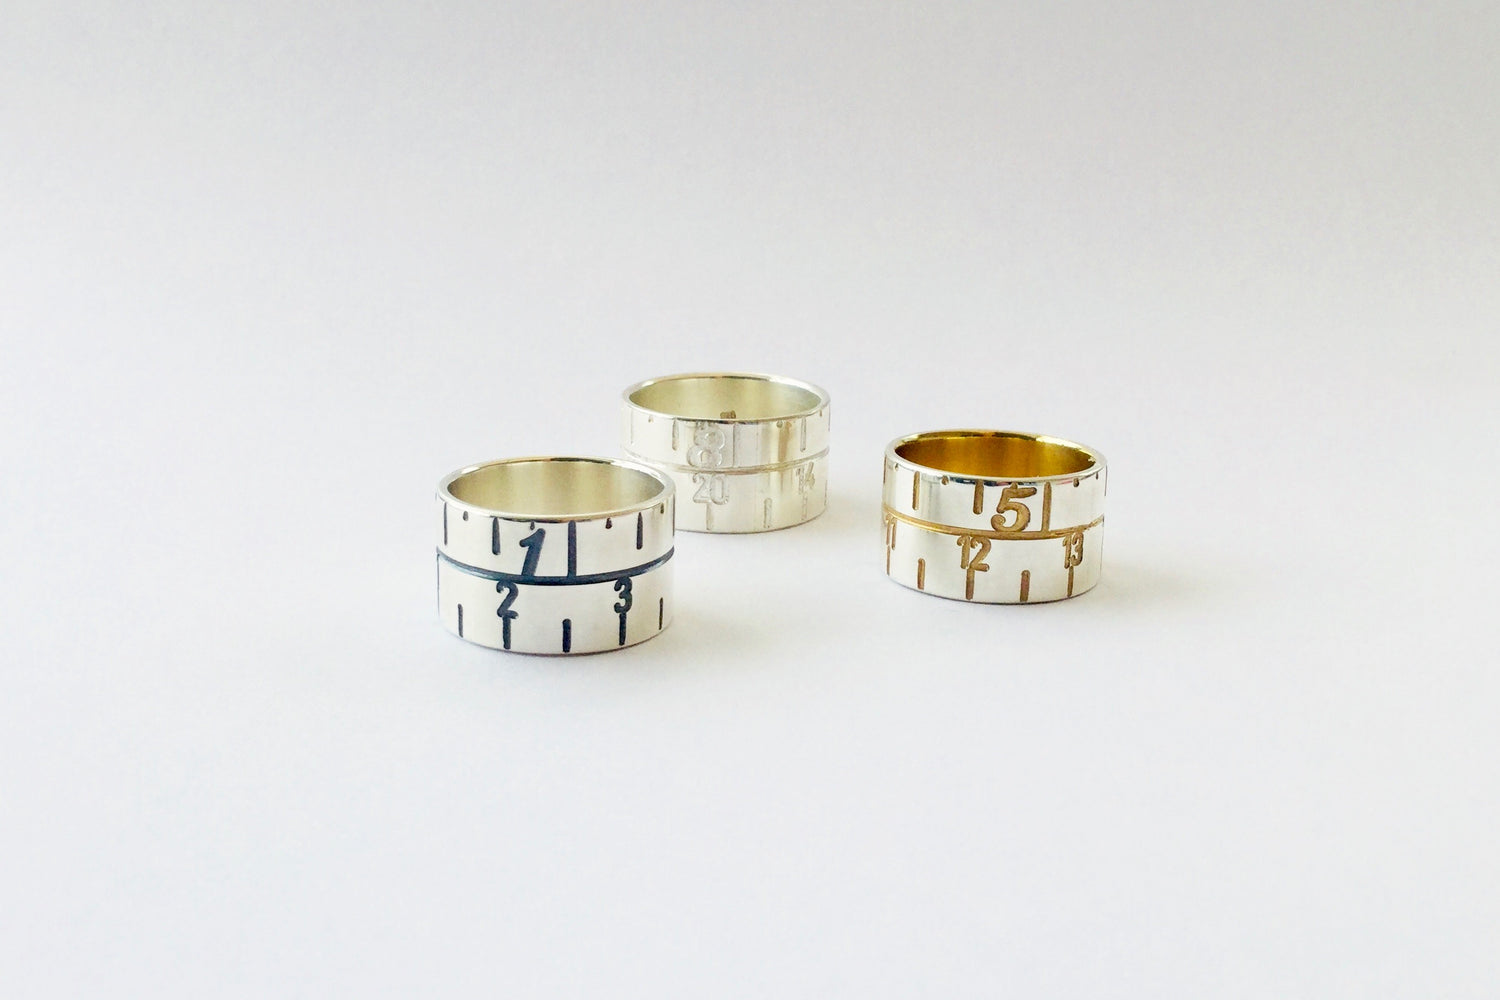 Narrow Tape Measure Ring - gold/silver